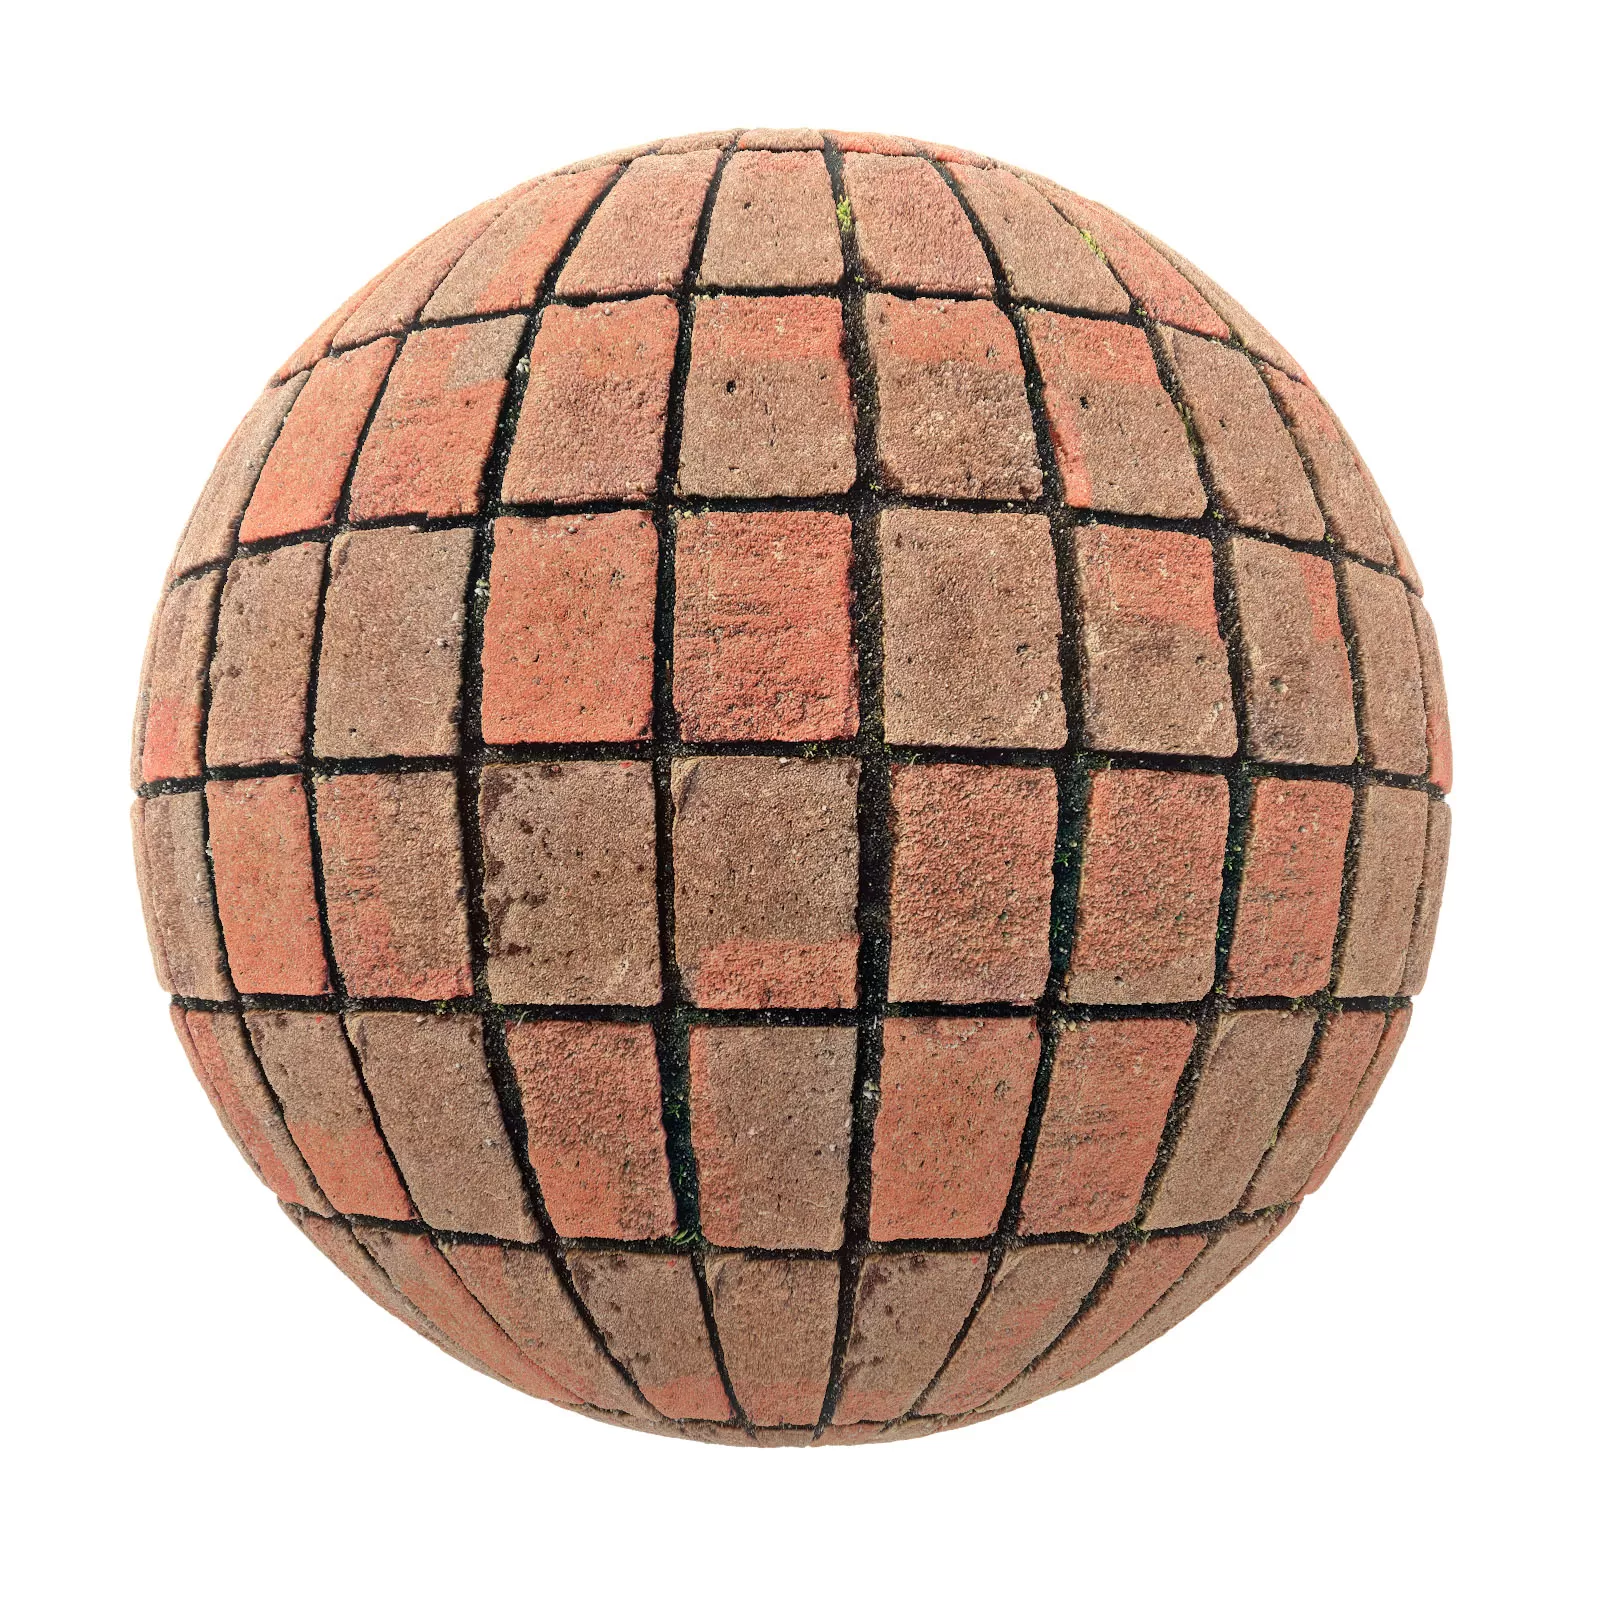 PBR CGAXIS TEXTURES – PAVEMENTS – Red Brick Pavement 5